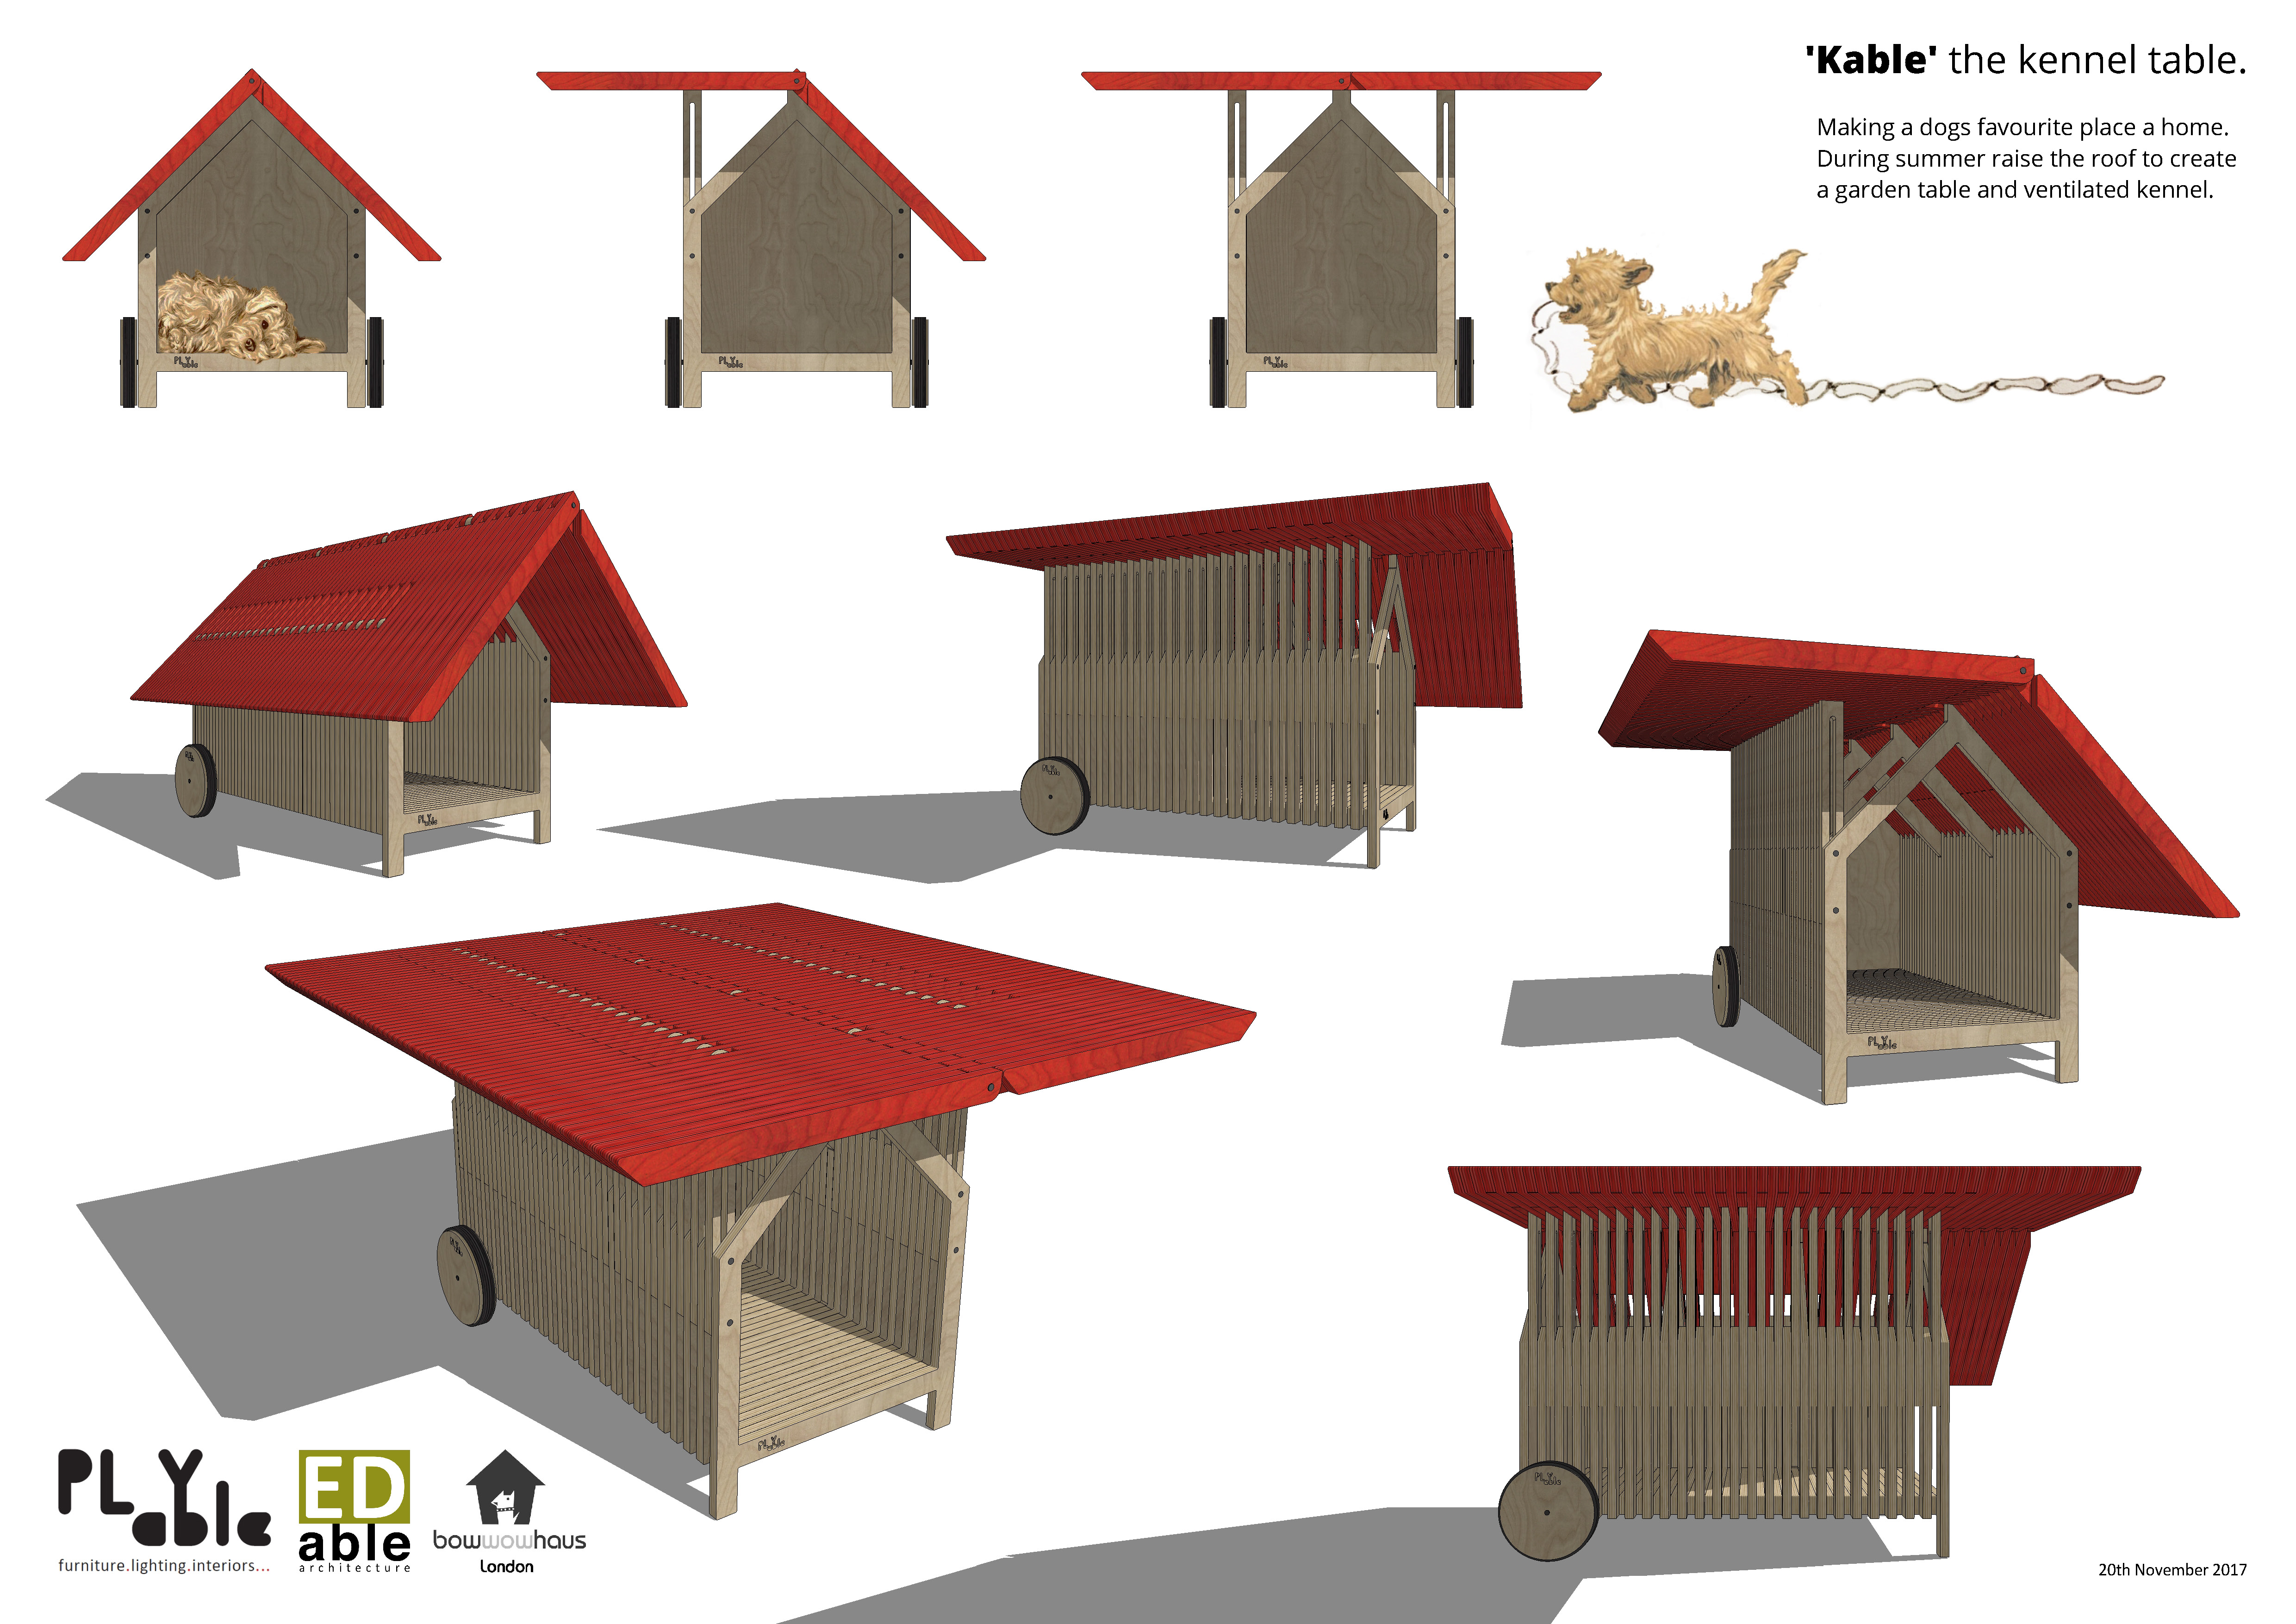 PLYable Design and EDable Architecture - Kable the Kennel Table - Image 4 of 5